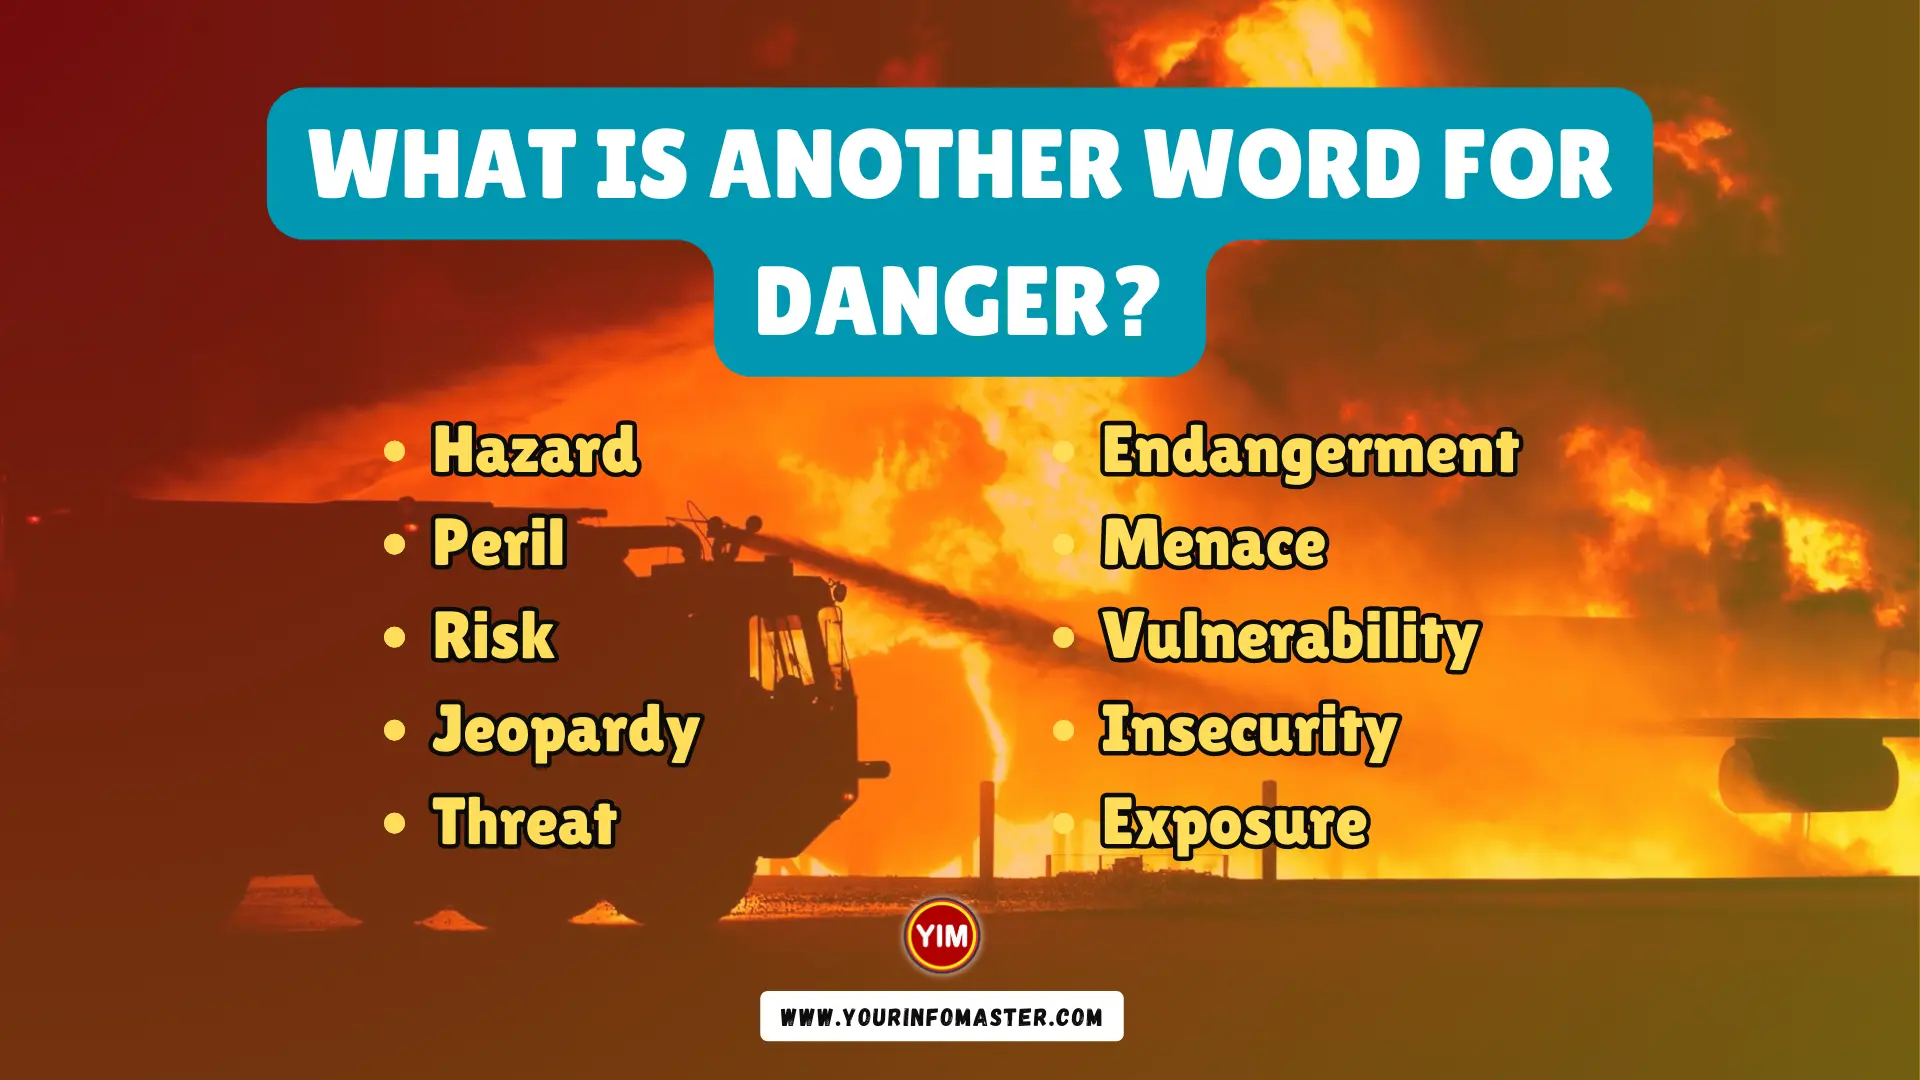 What is another word for Danger